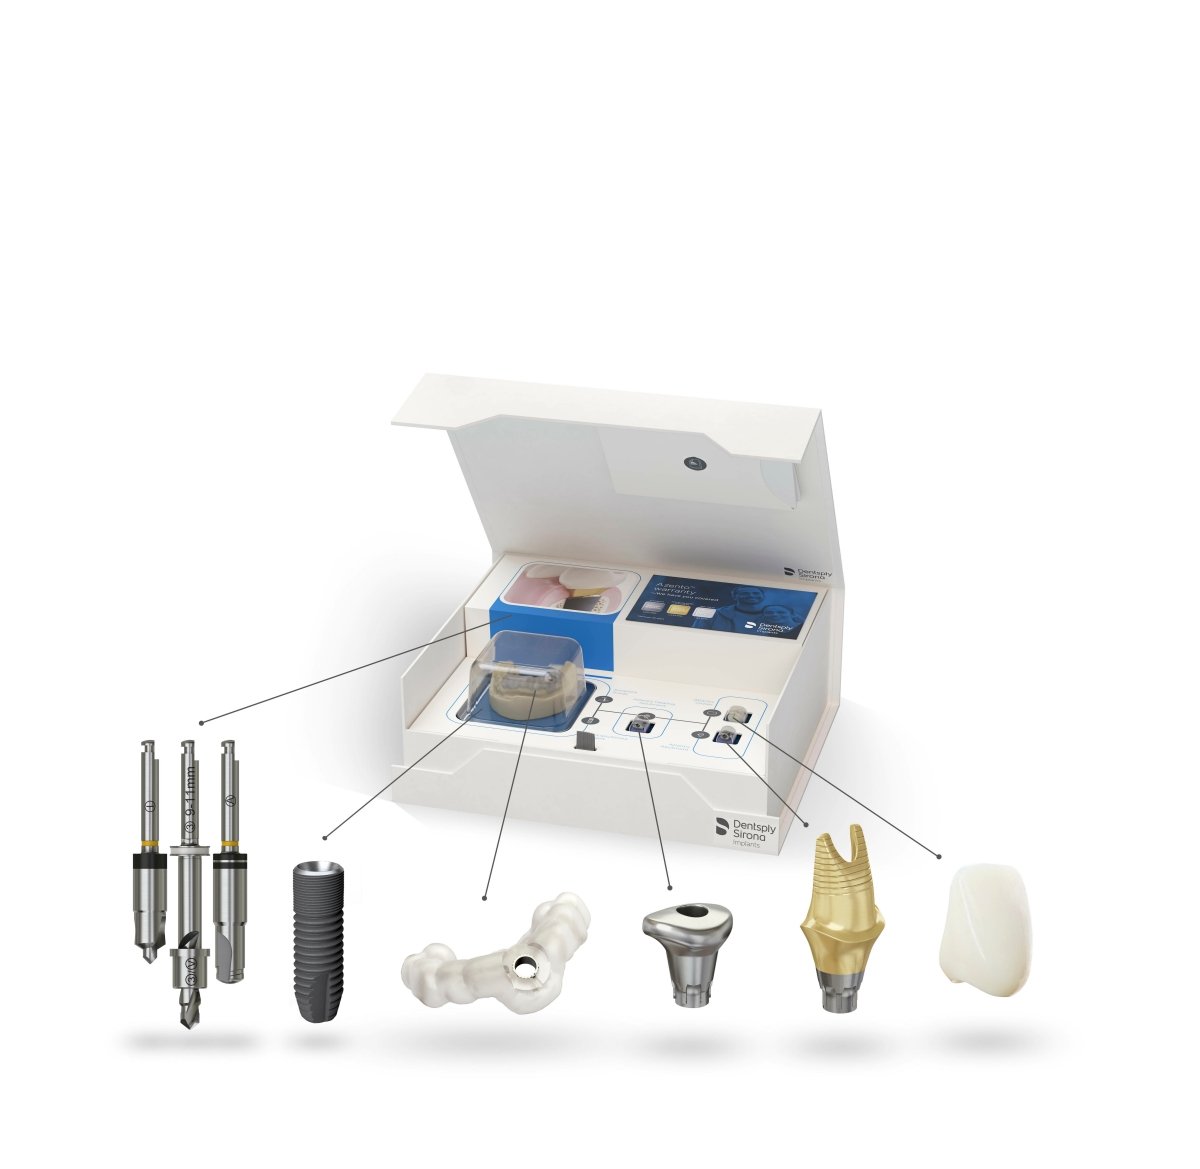 Dentsply Sirona Implants unveils two innovations in implant dentistry 